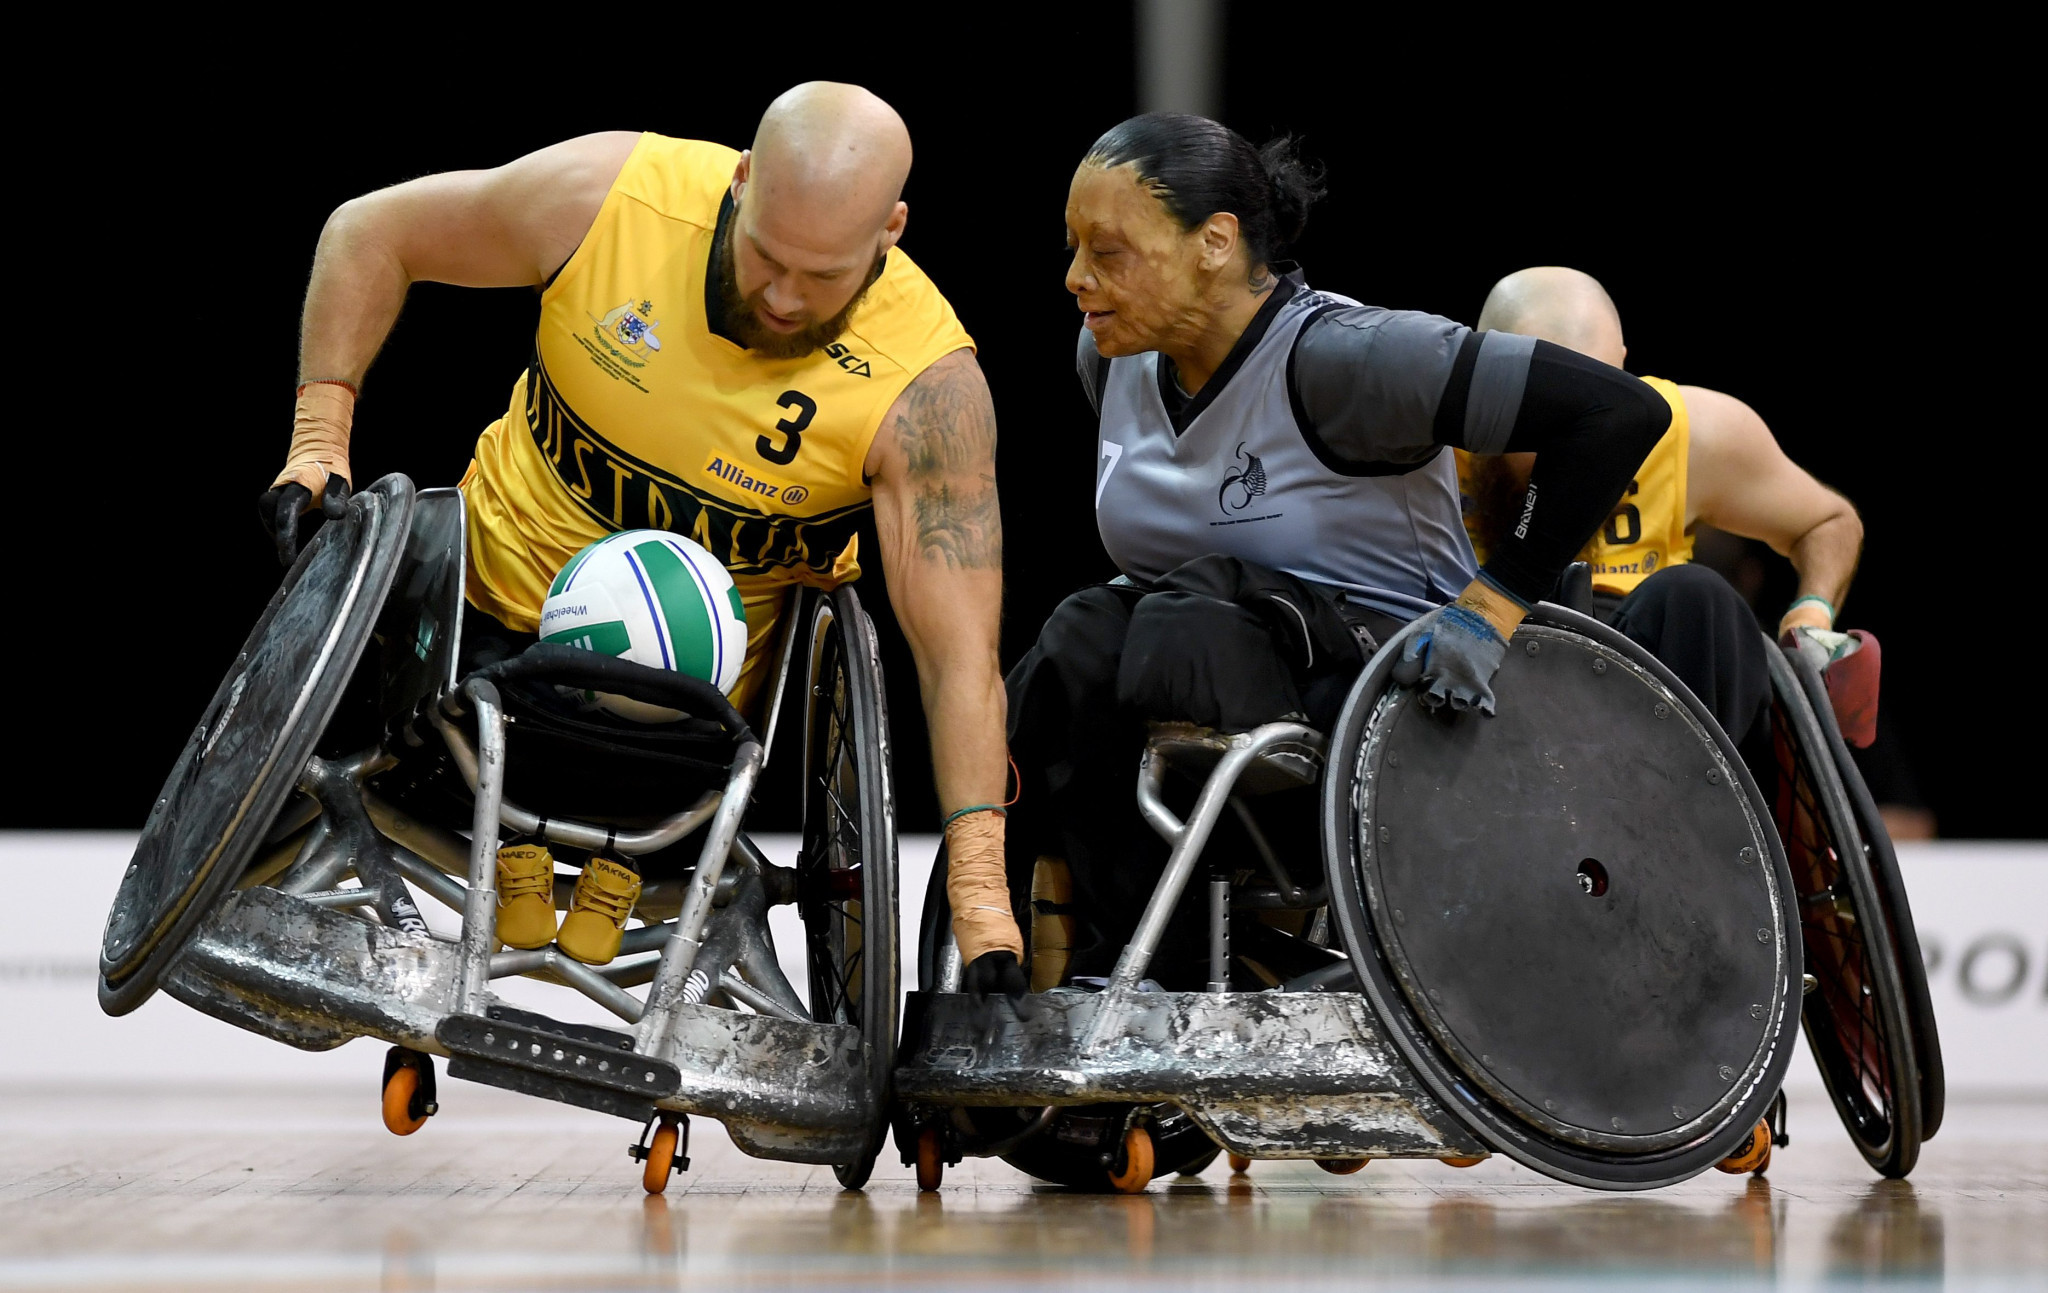 Hosts Australia open Wheelchair Rugby World Championship with fine win as France shock Canada